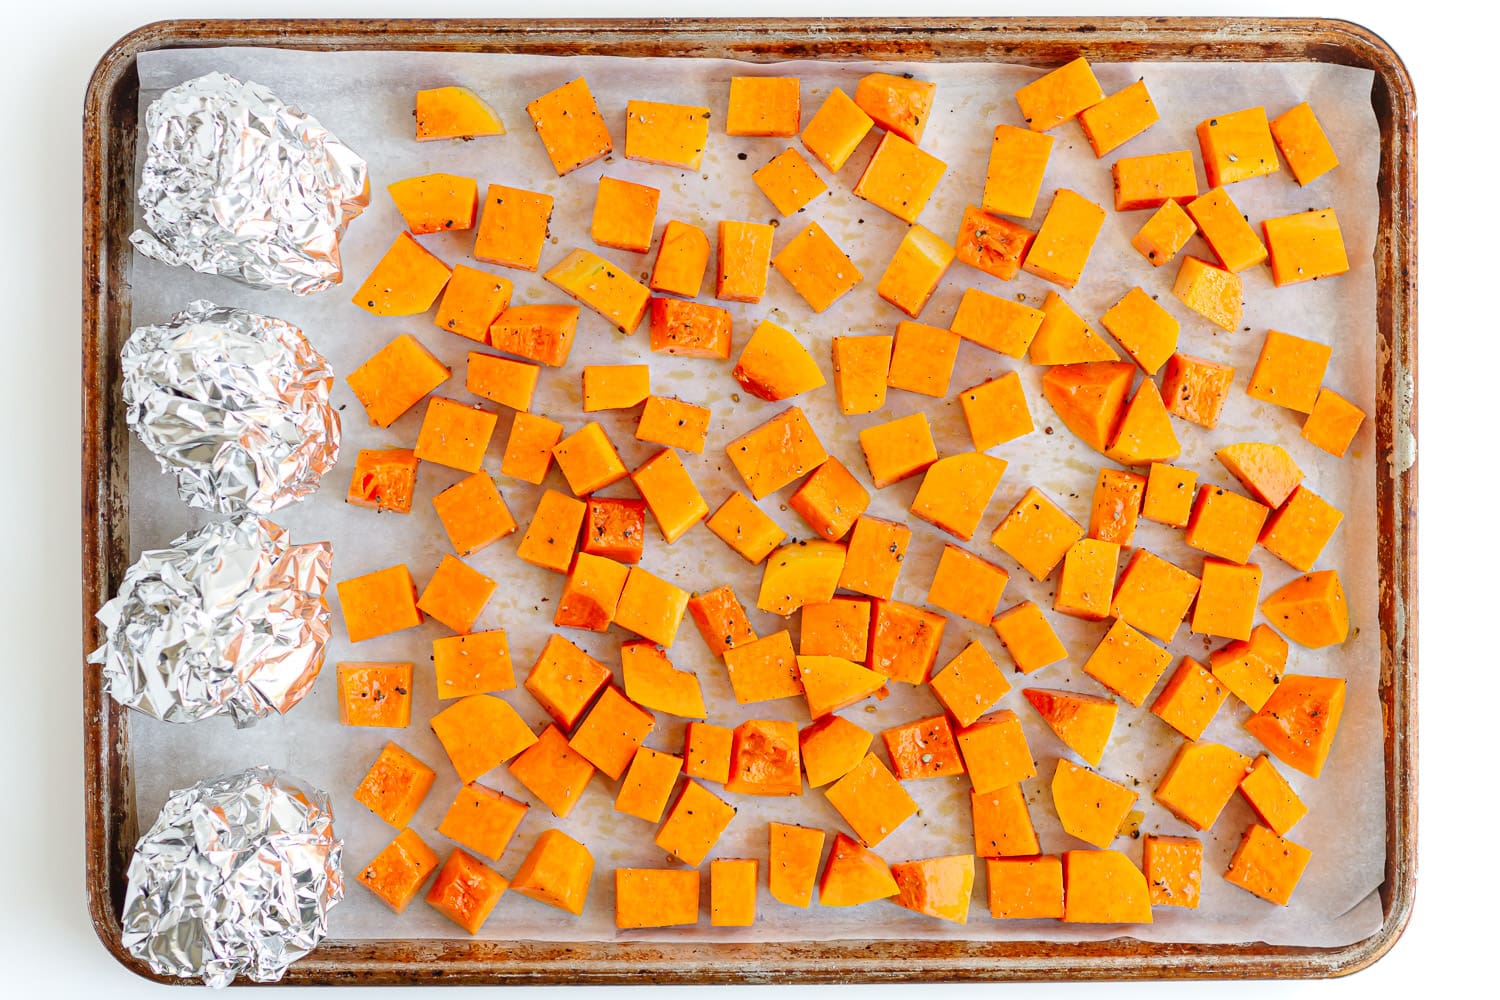 Cubed pumpkin and beets wrapped in foil on a lined baking sheet.